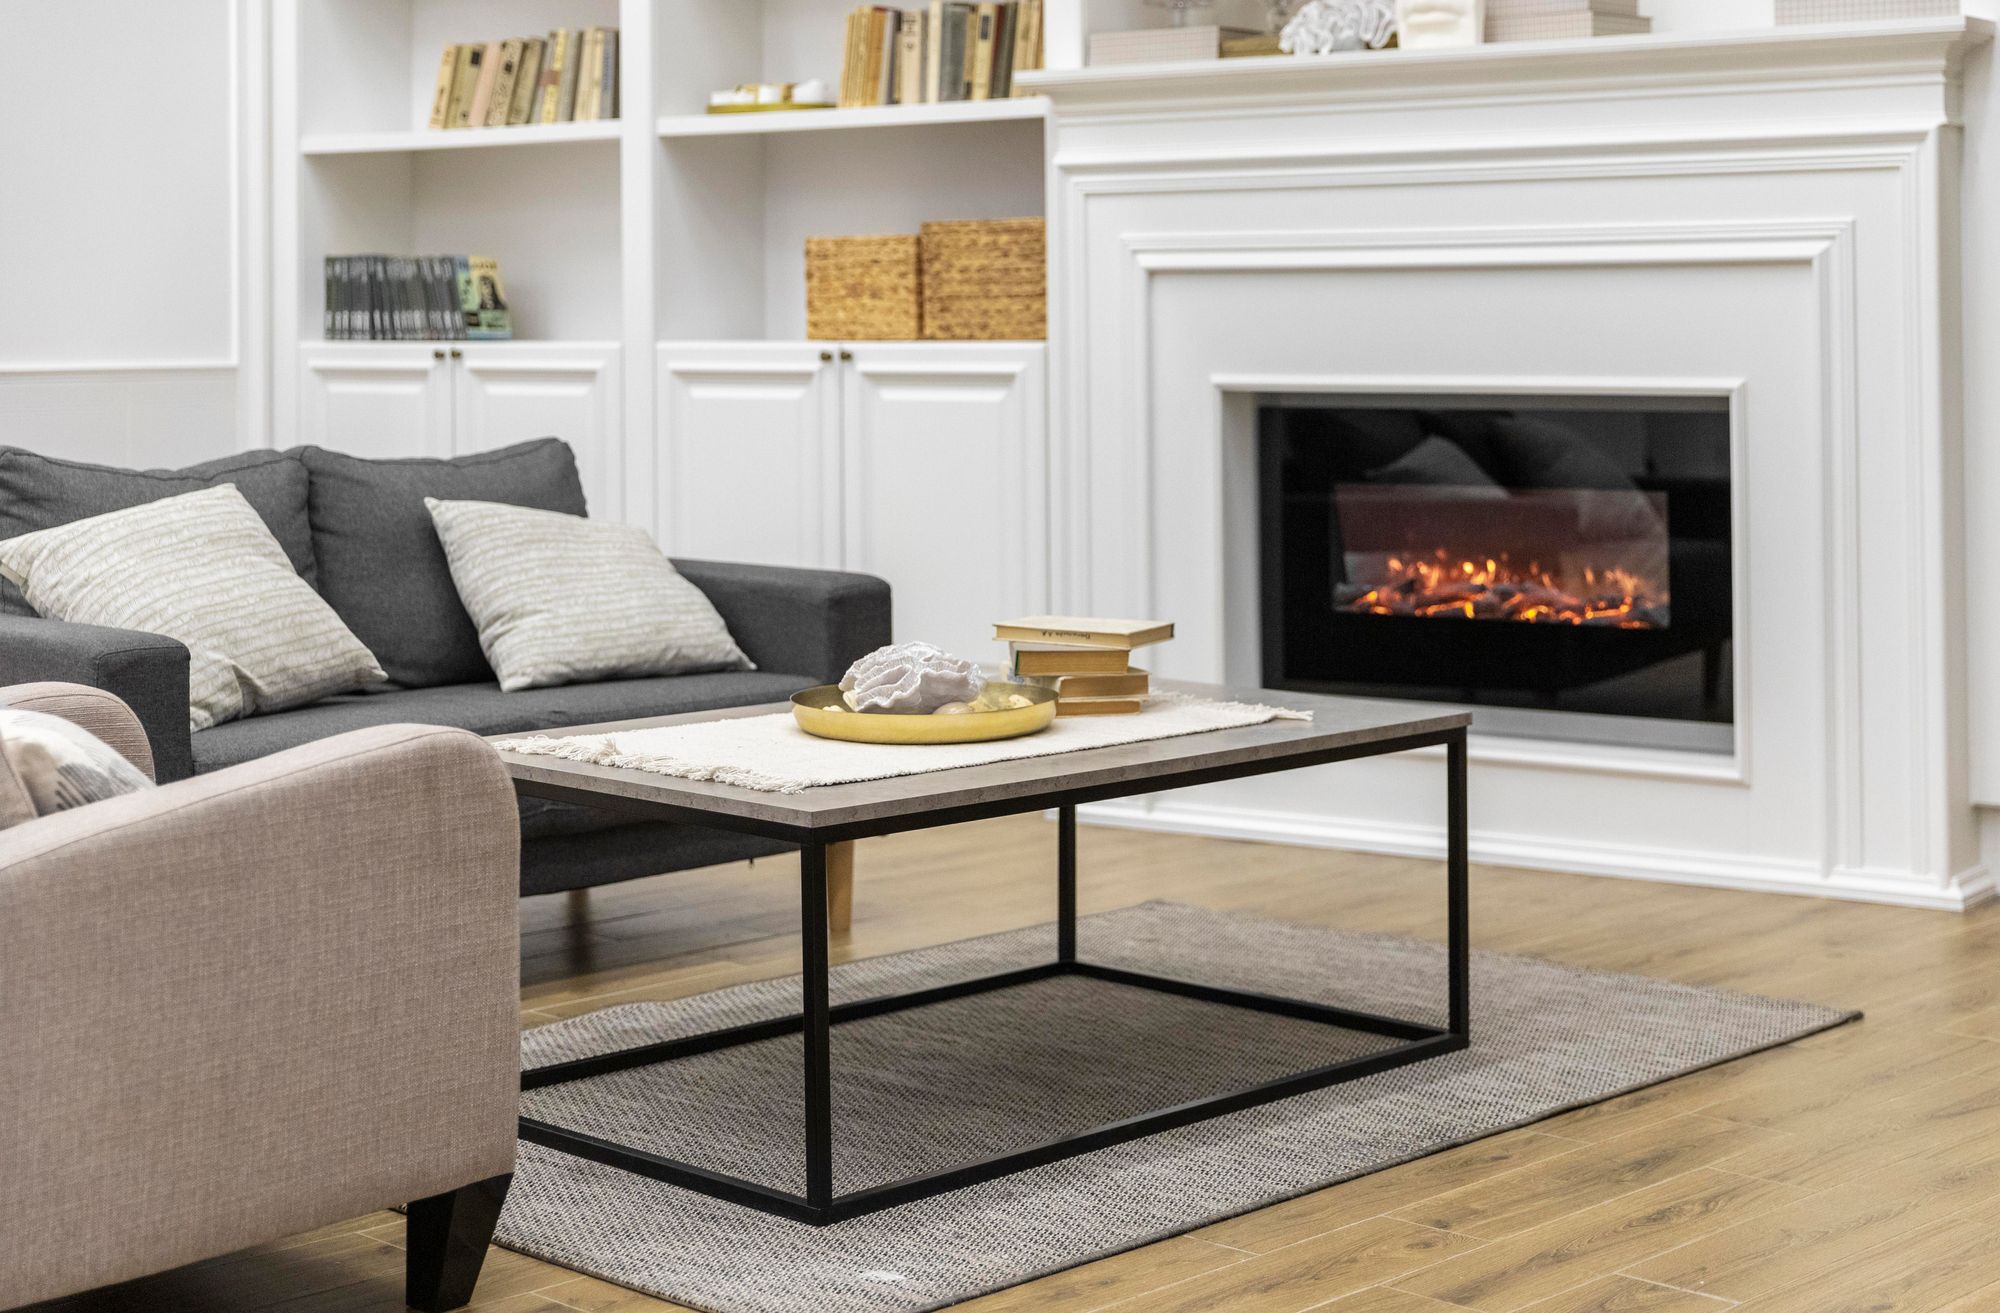 Factors Affecting Gas Fireplace Insert Cost